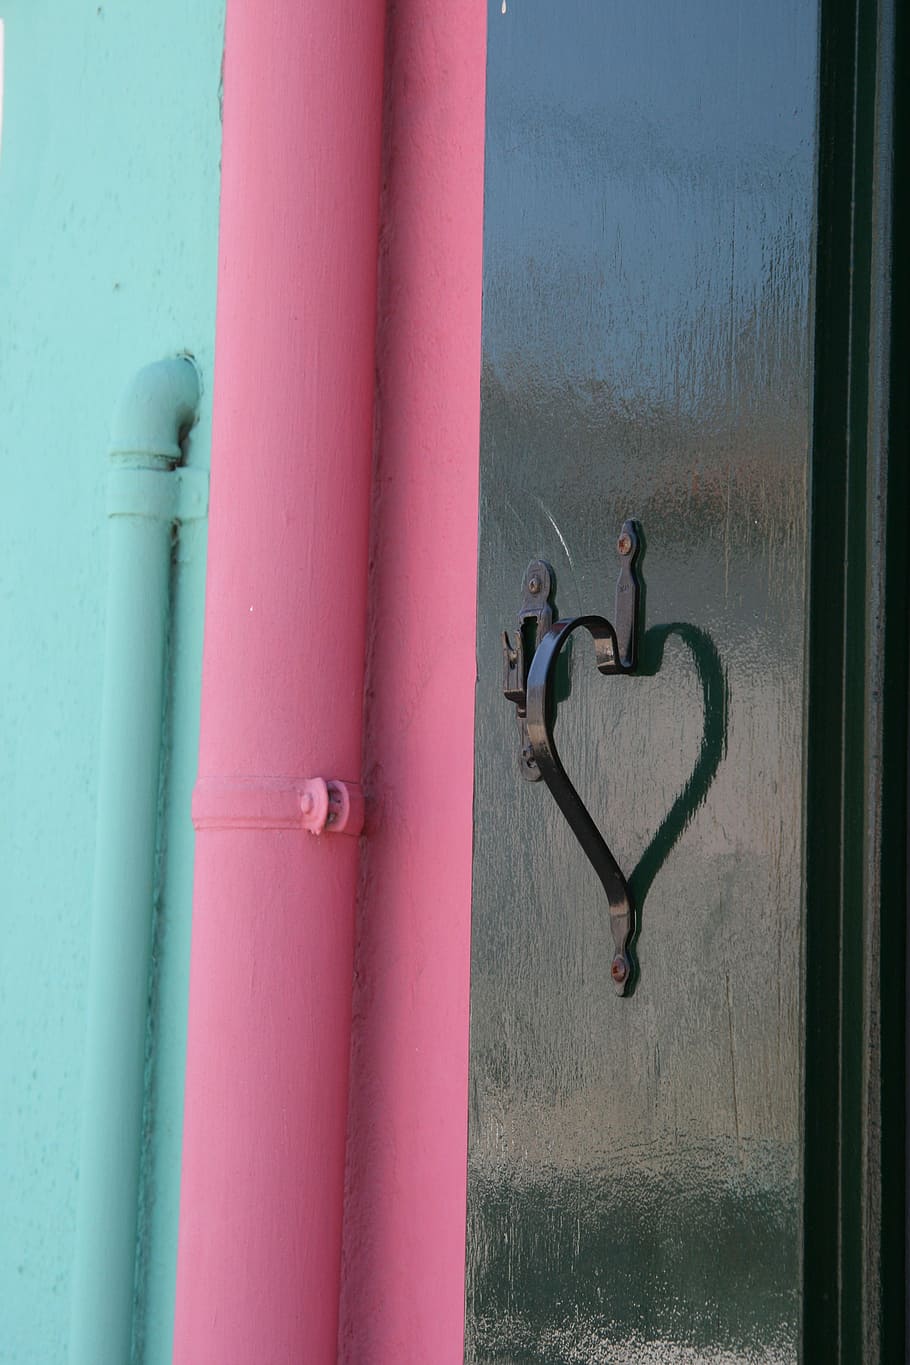 heart, color, door, handle, venice, metal, day, protection, wall - building feature, security